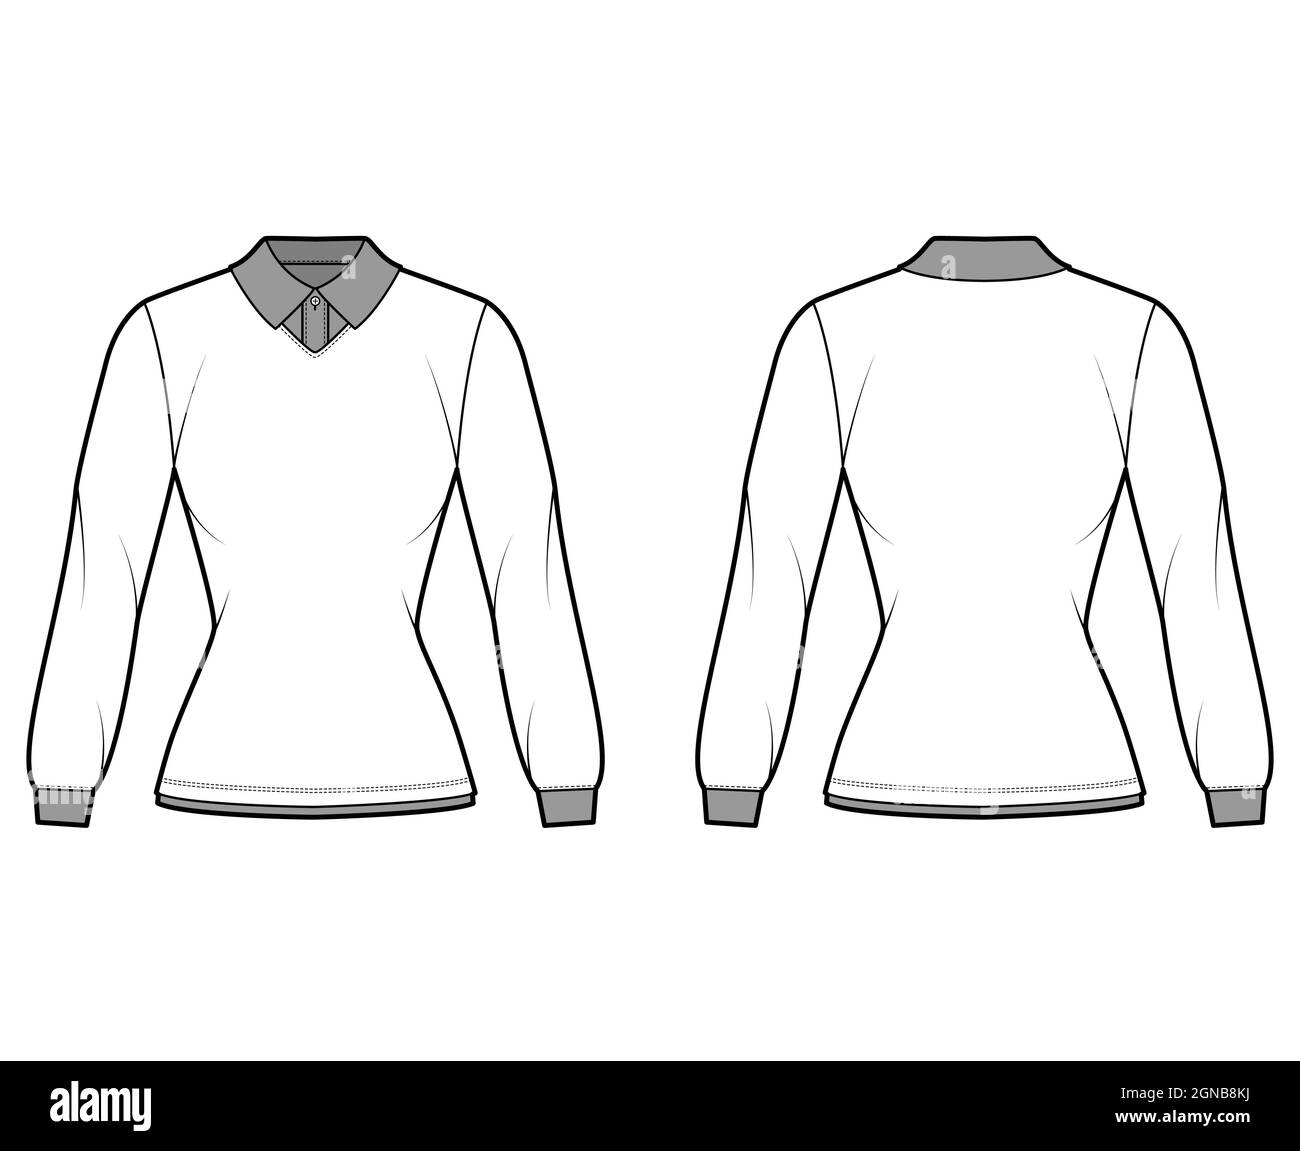 Shirt double collar technical fashion illustration with long sleeves, tunic length, henley neck, fitted, flat classic collar. Apparel top outwear template front, back, white color. Women CAD mockup Stock Vector